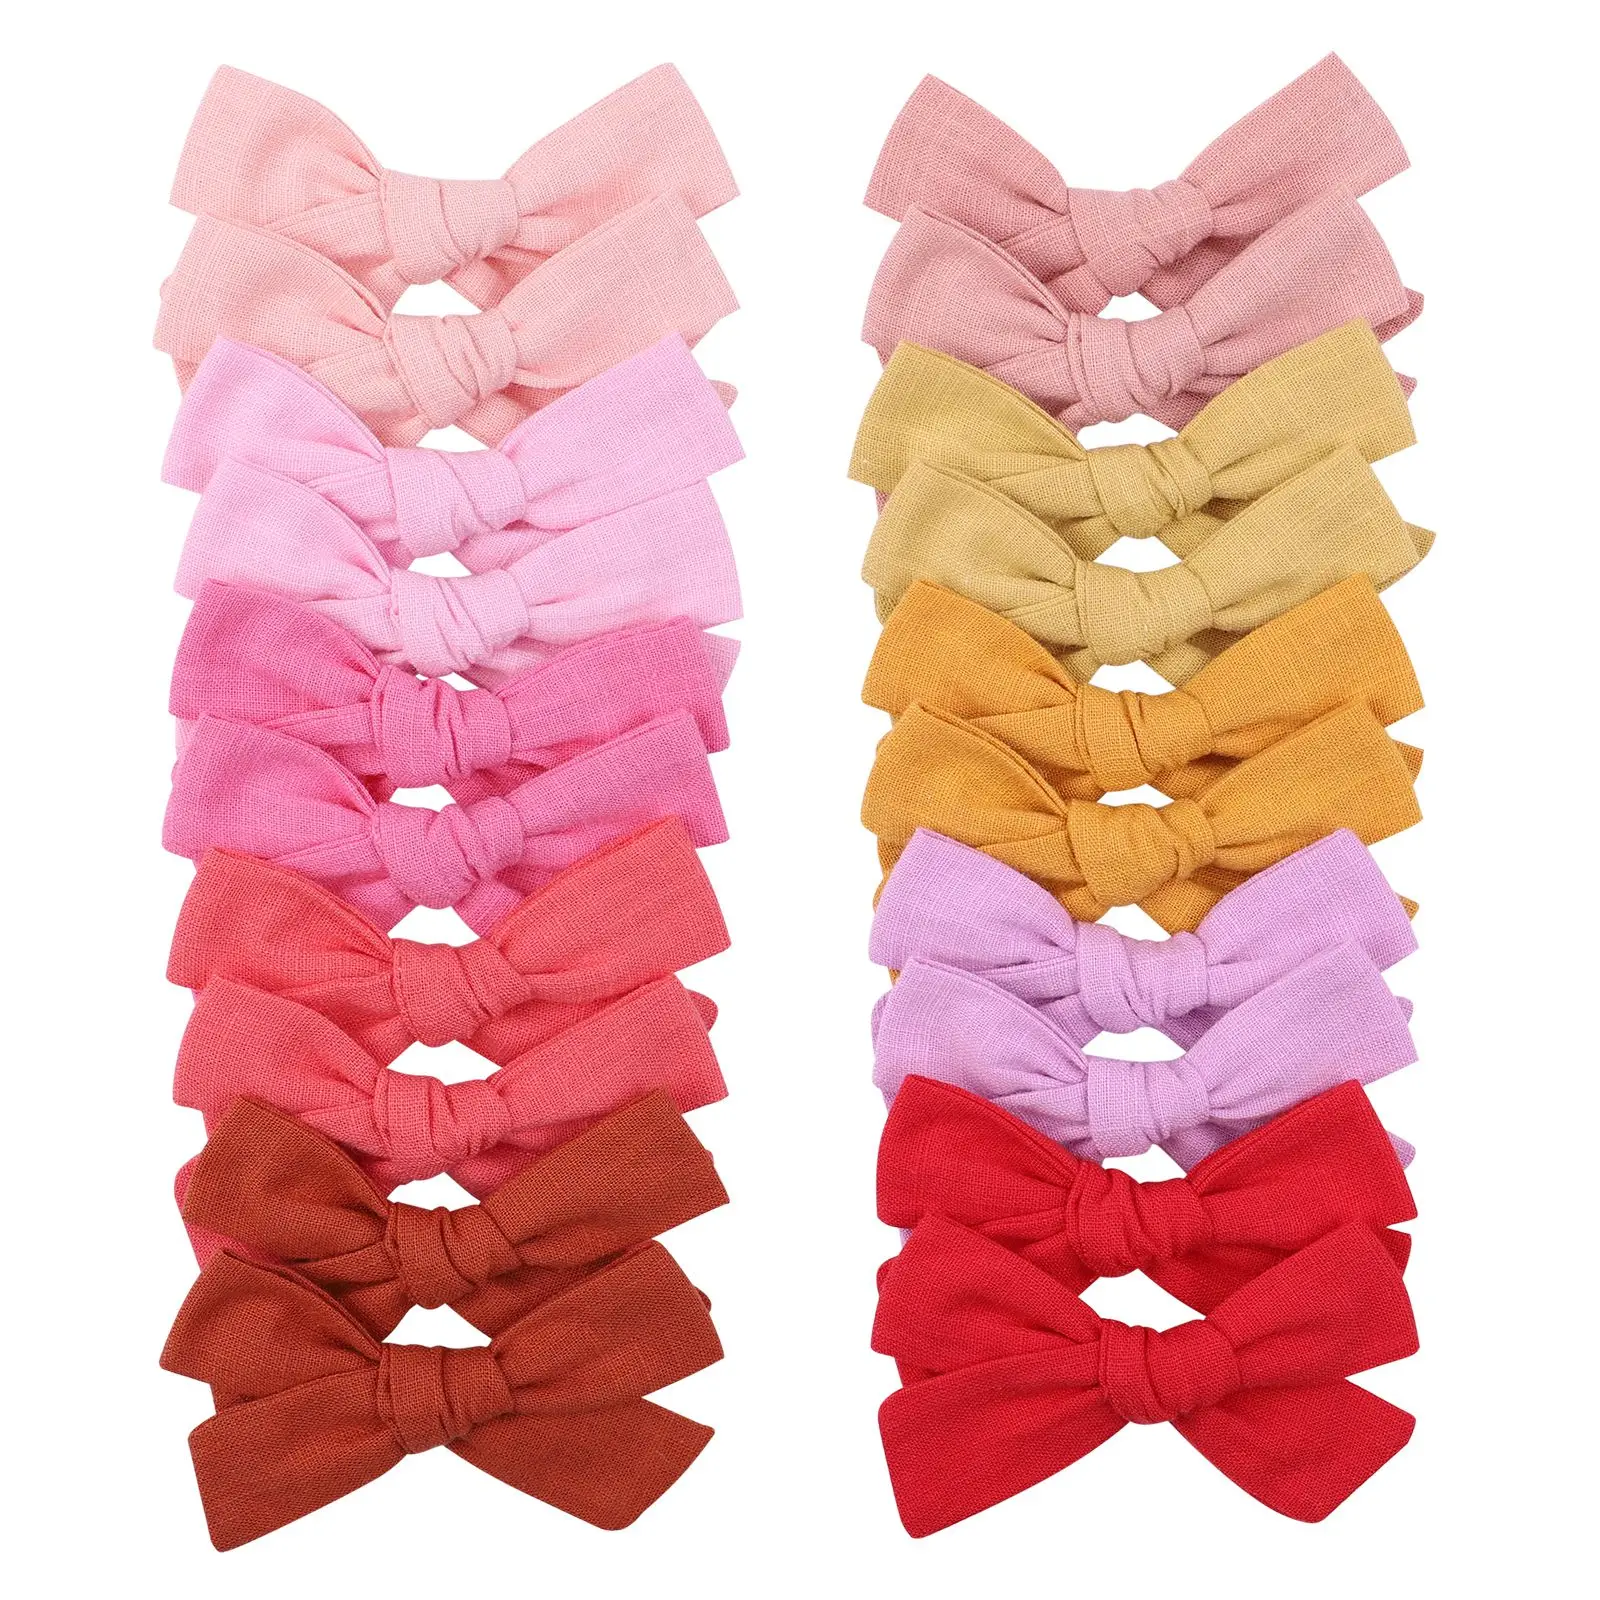 

40pc/lot Baby Girls Hair Clips 3.5 Inch Solid Cotton Hair Bows Clips For Hair Boutique Hairpins Headwear Kids Hair Acesssories